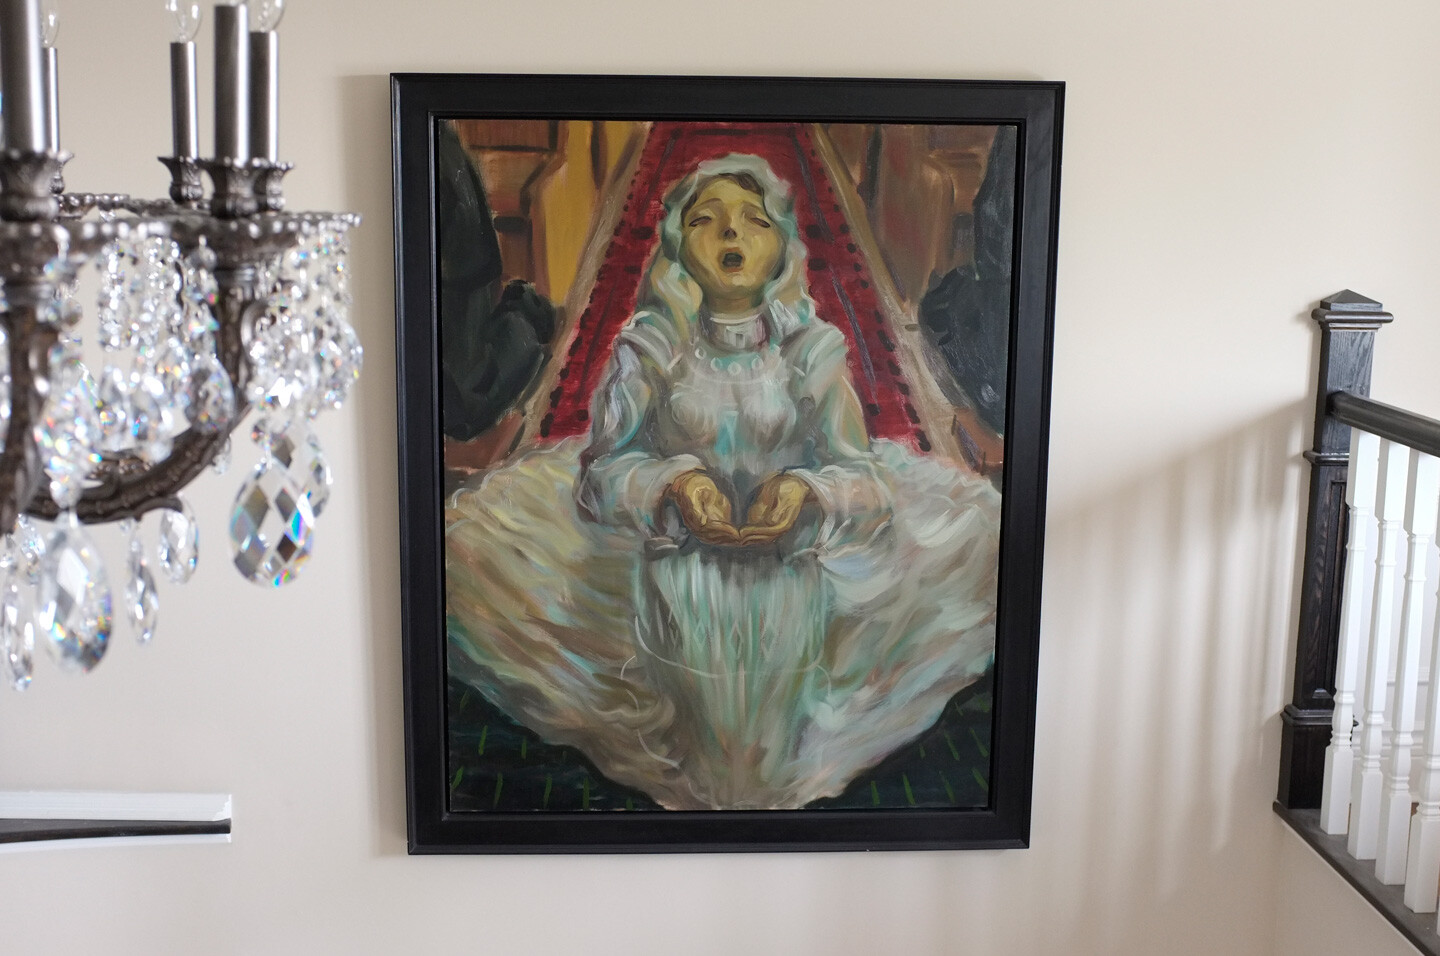 THE FIRST COMMUNION, painted by Vince Mancuso in 1990, oil on canvas 4x5 feet, private collection.